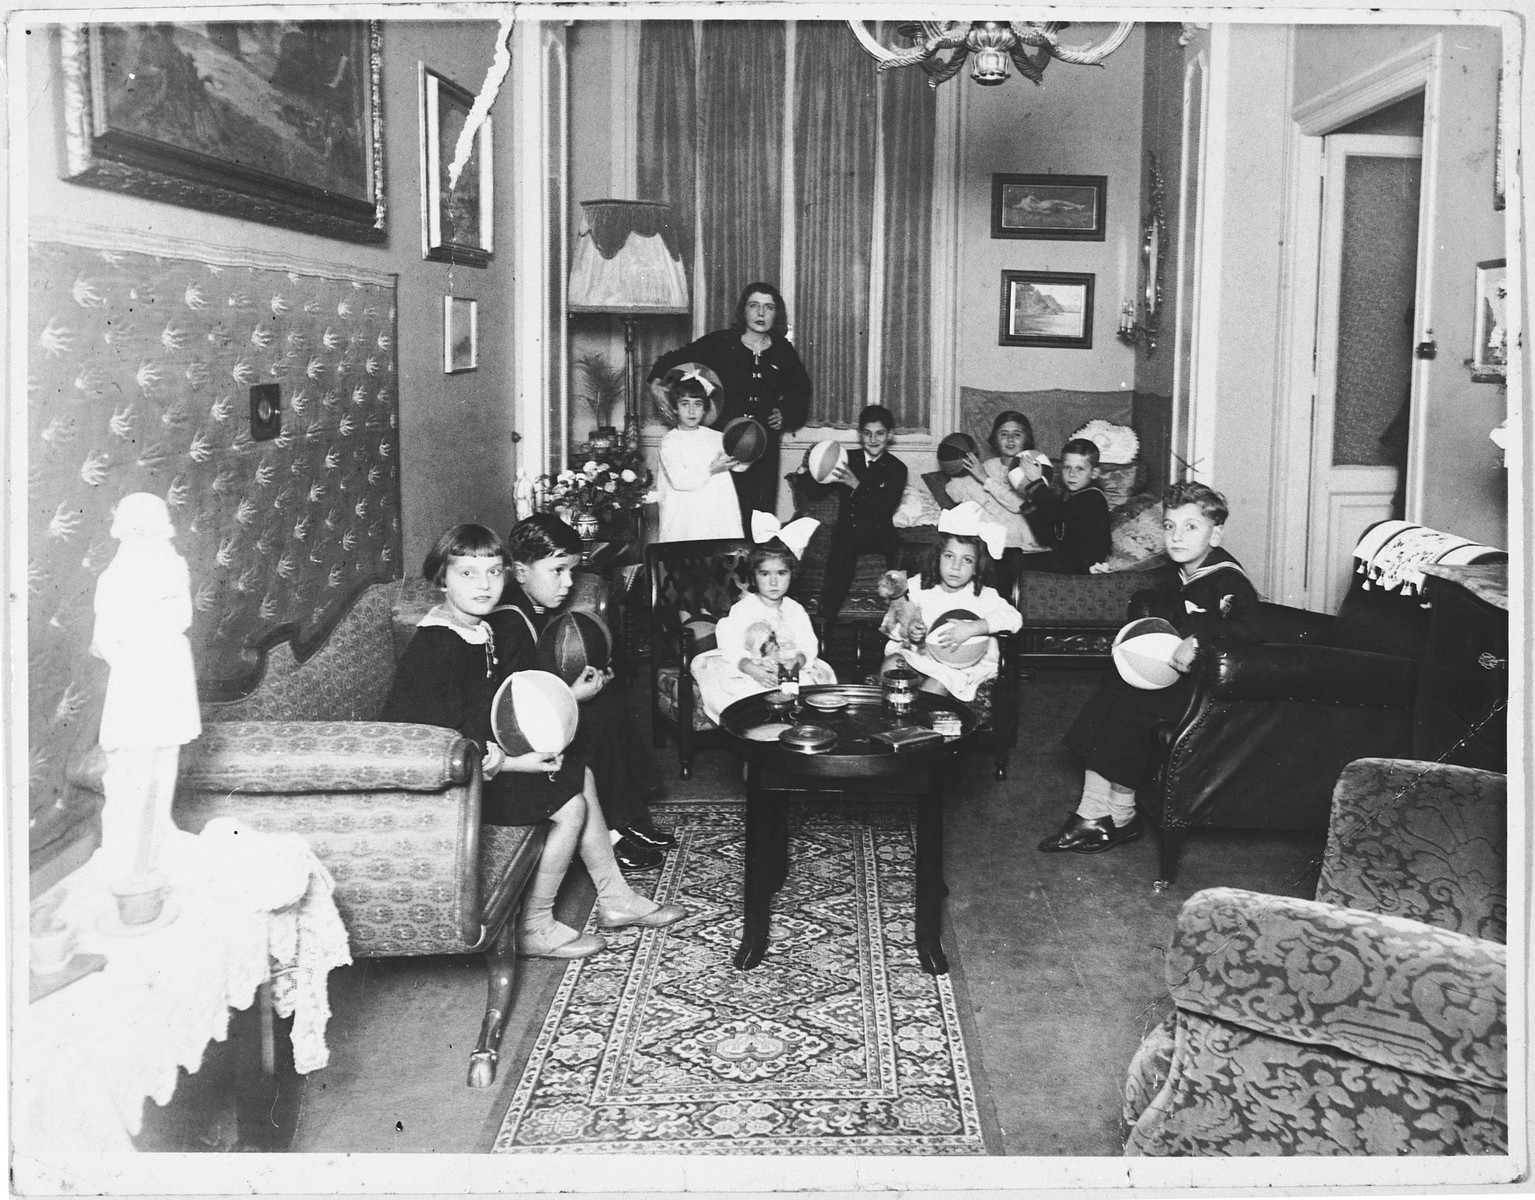 Jewish children attend a birthday party in an opulent apartment in Rome owned by a Hungarian Jewish woman.

Among those pictured are Serenella and Avishua Foa and their cousins, Anna and Andrea Bises.